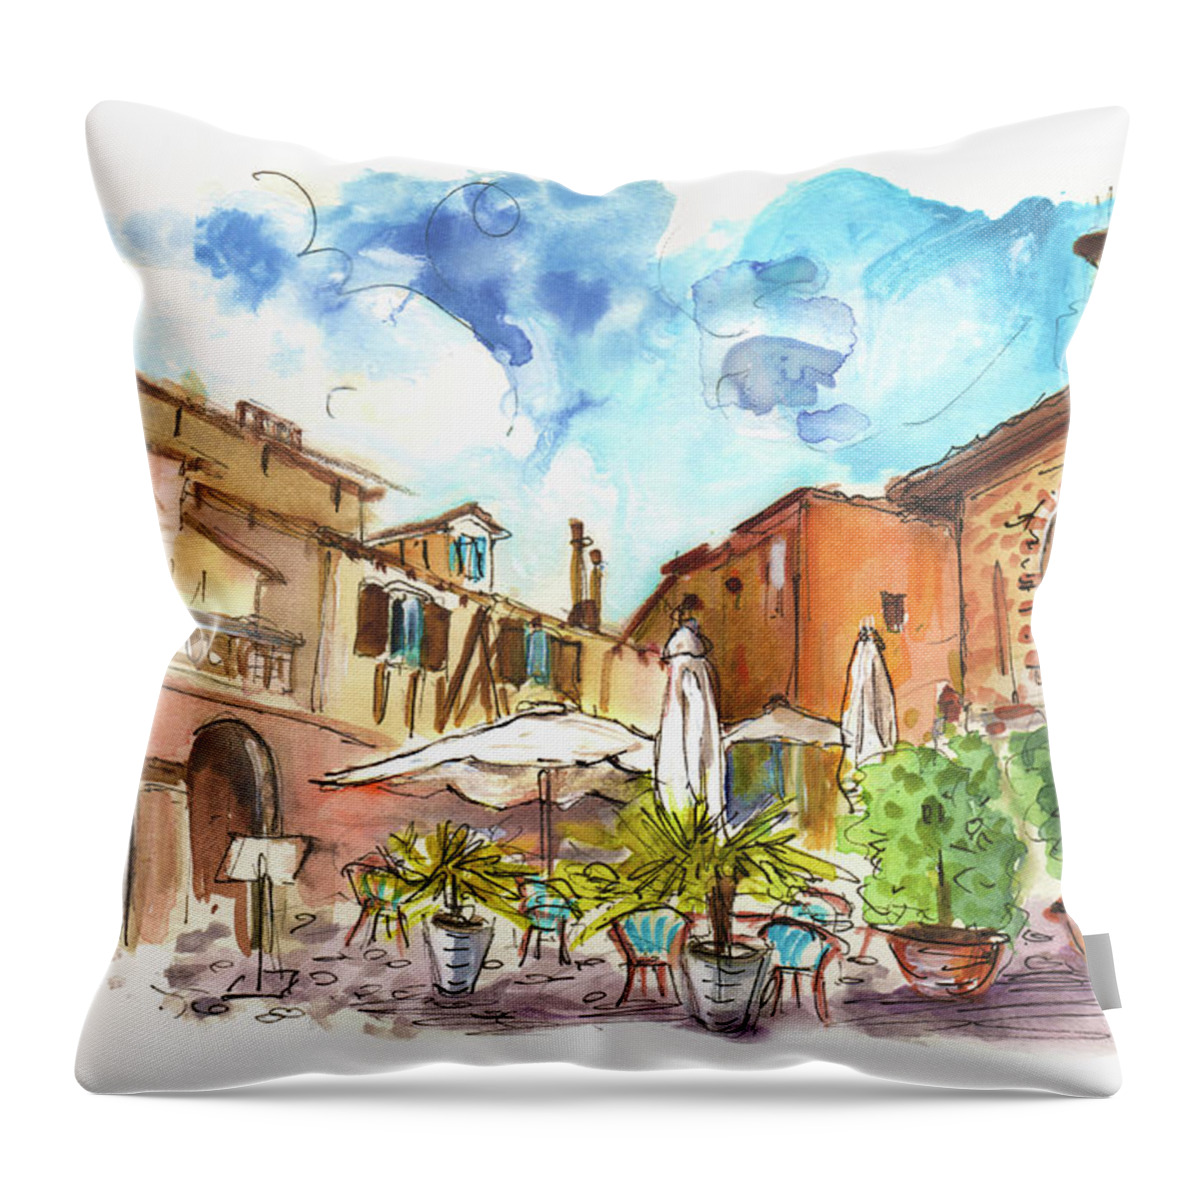 Travel Throw Pillow featuring the painting Lovely Street Cafe In Albi by Miki De Goodaboom